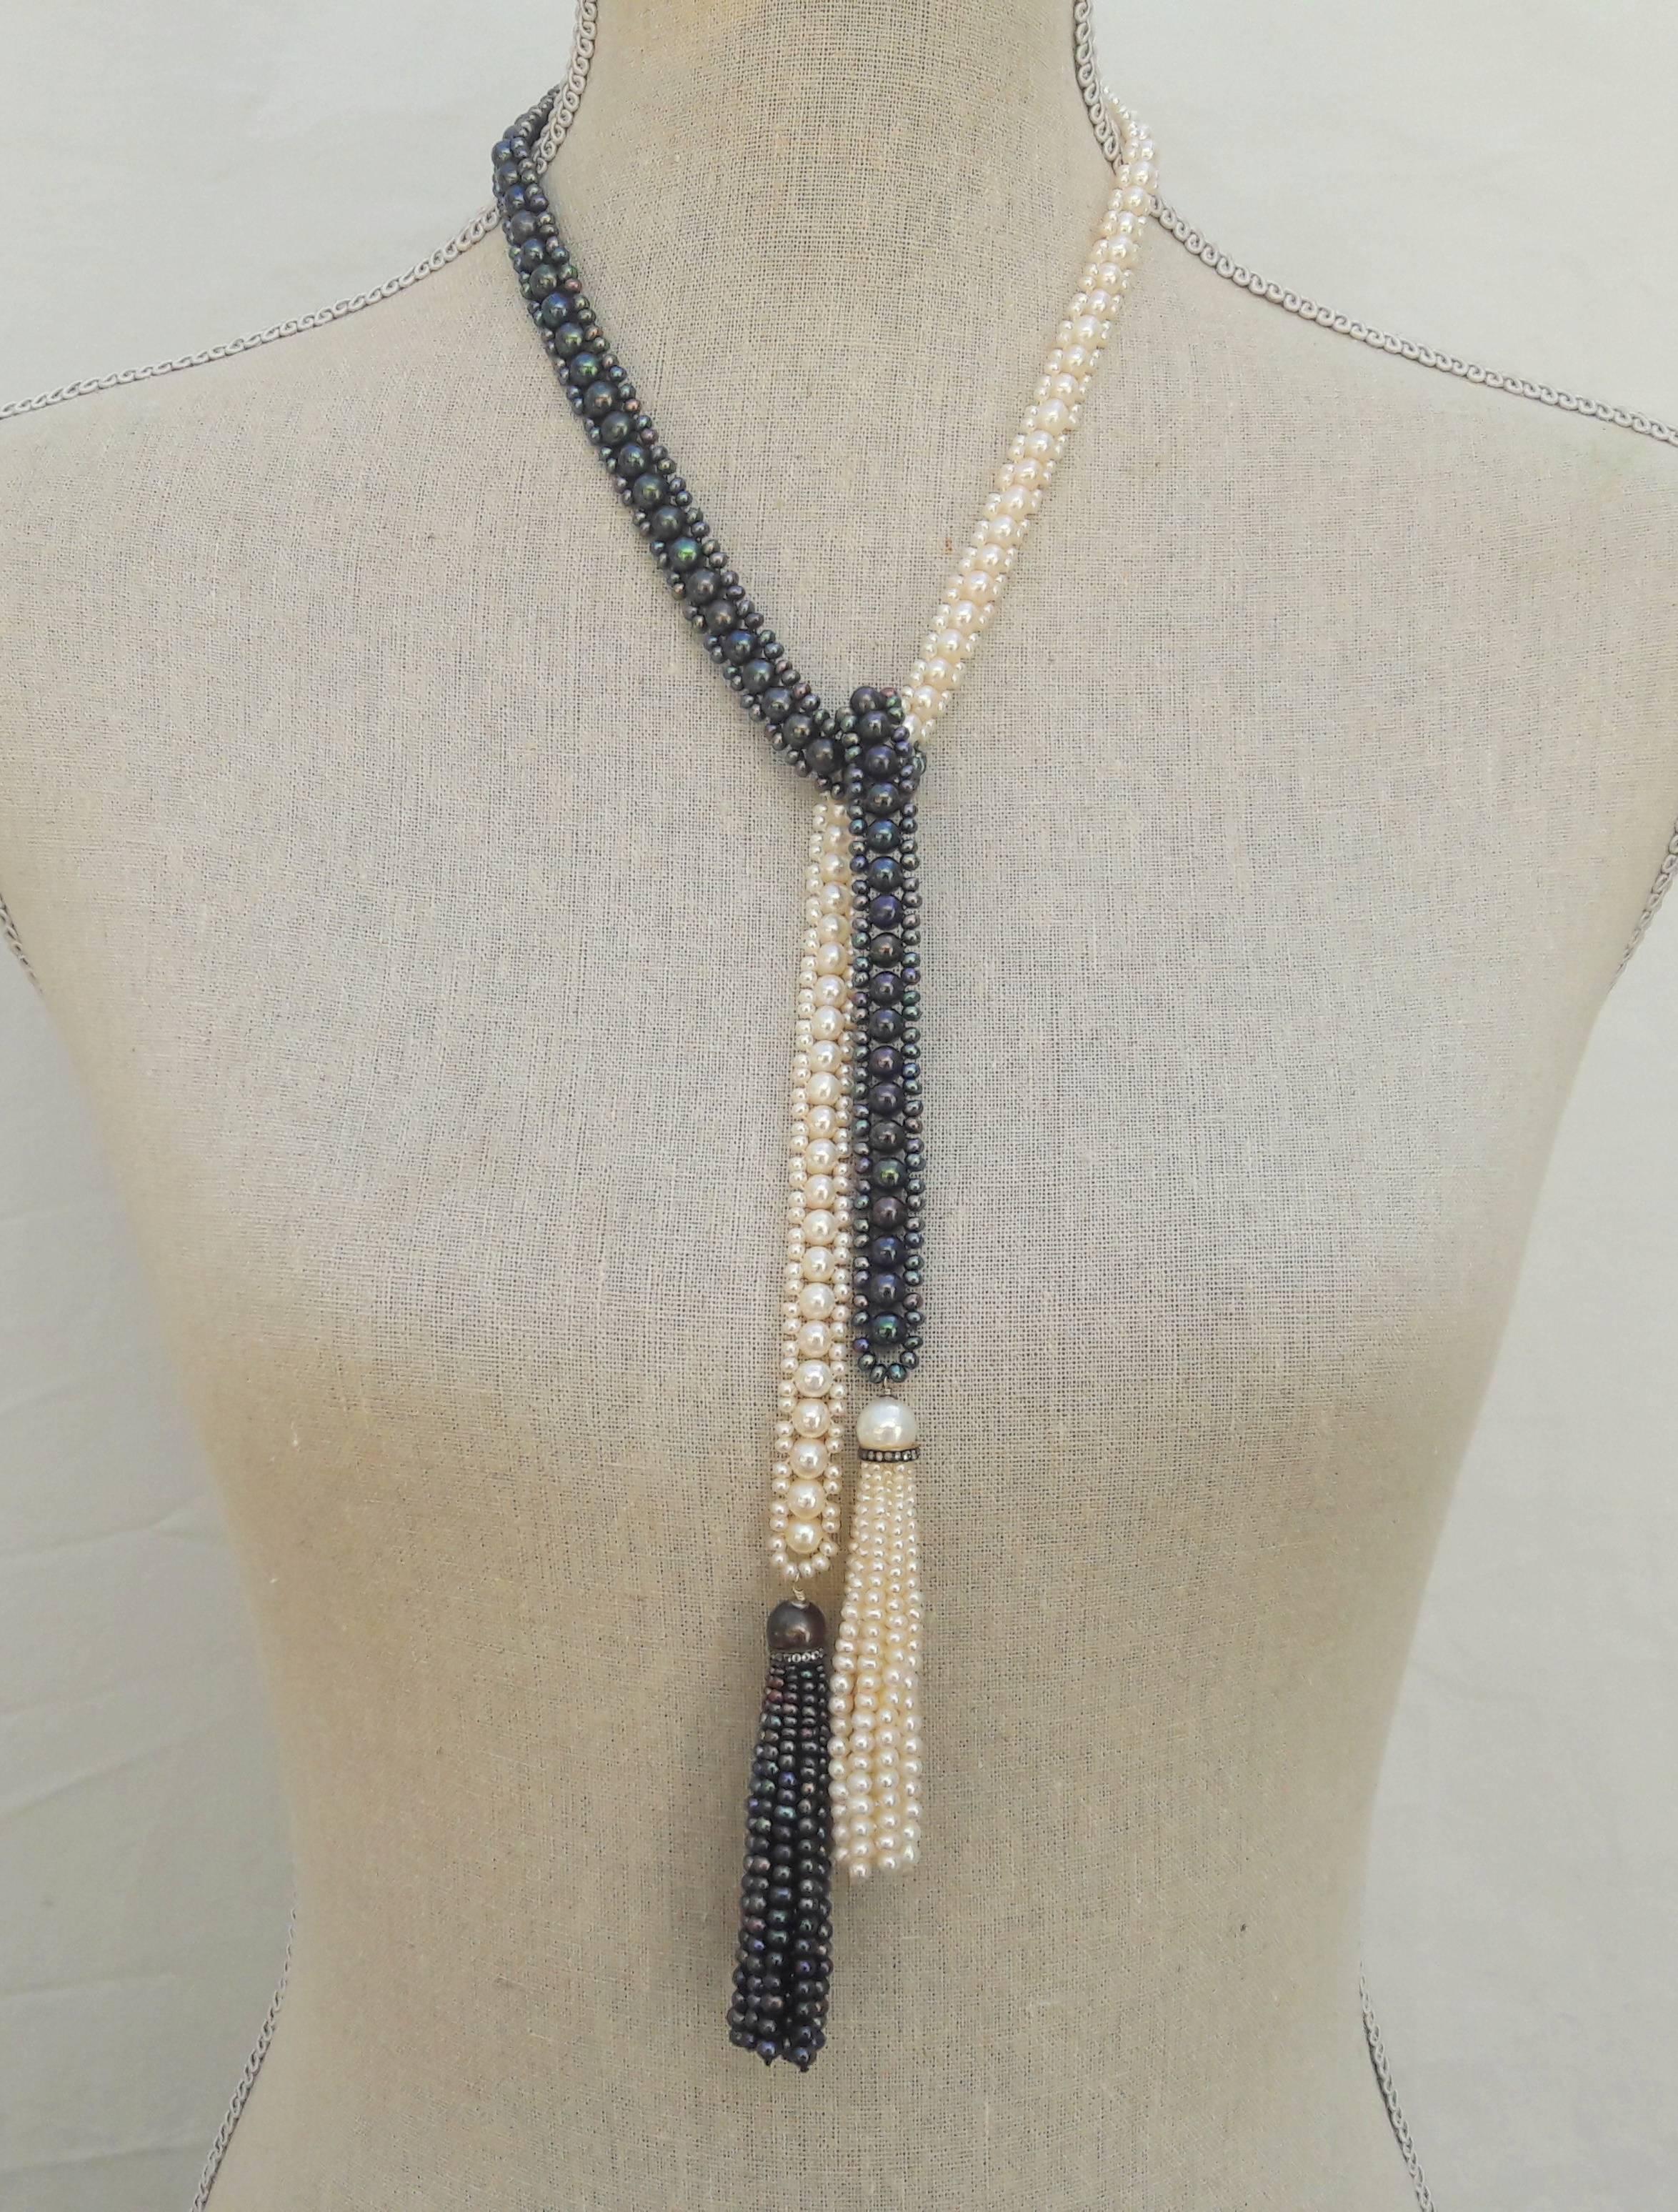 This beautiful and dramatic necklace draws its inspiration from the Art Deco color contrast and composition. This versatile necklace can be worn in a variety of different ways: long, wrapped, and tied, with or without brooch (brooch NOT included in